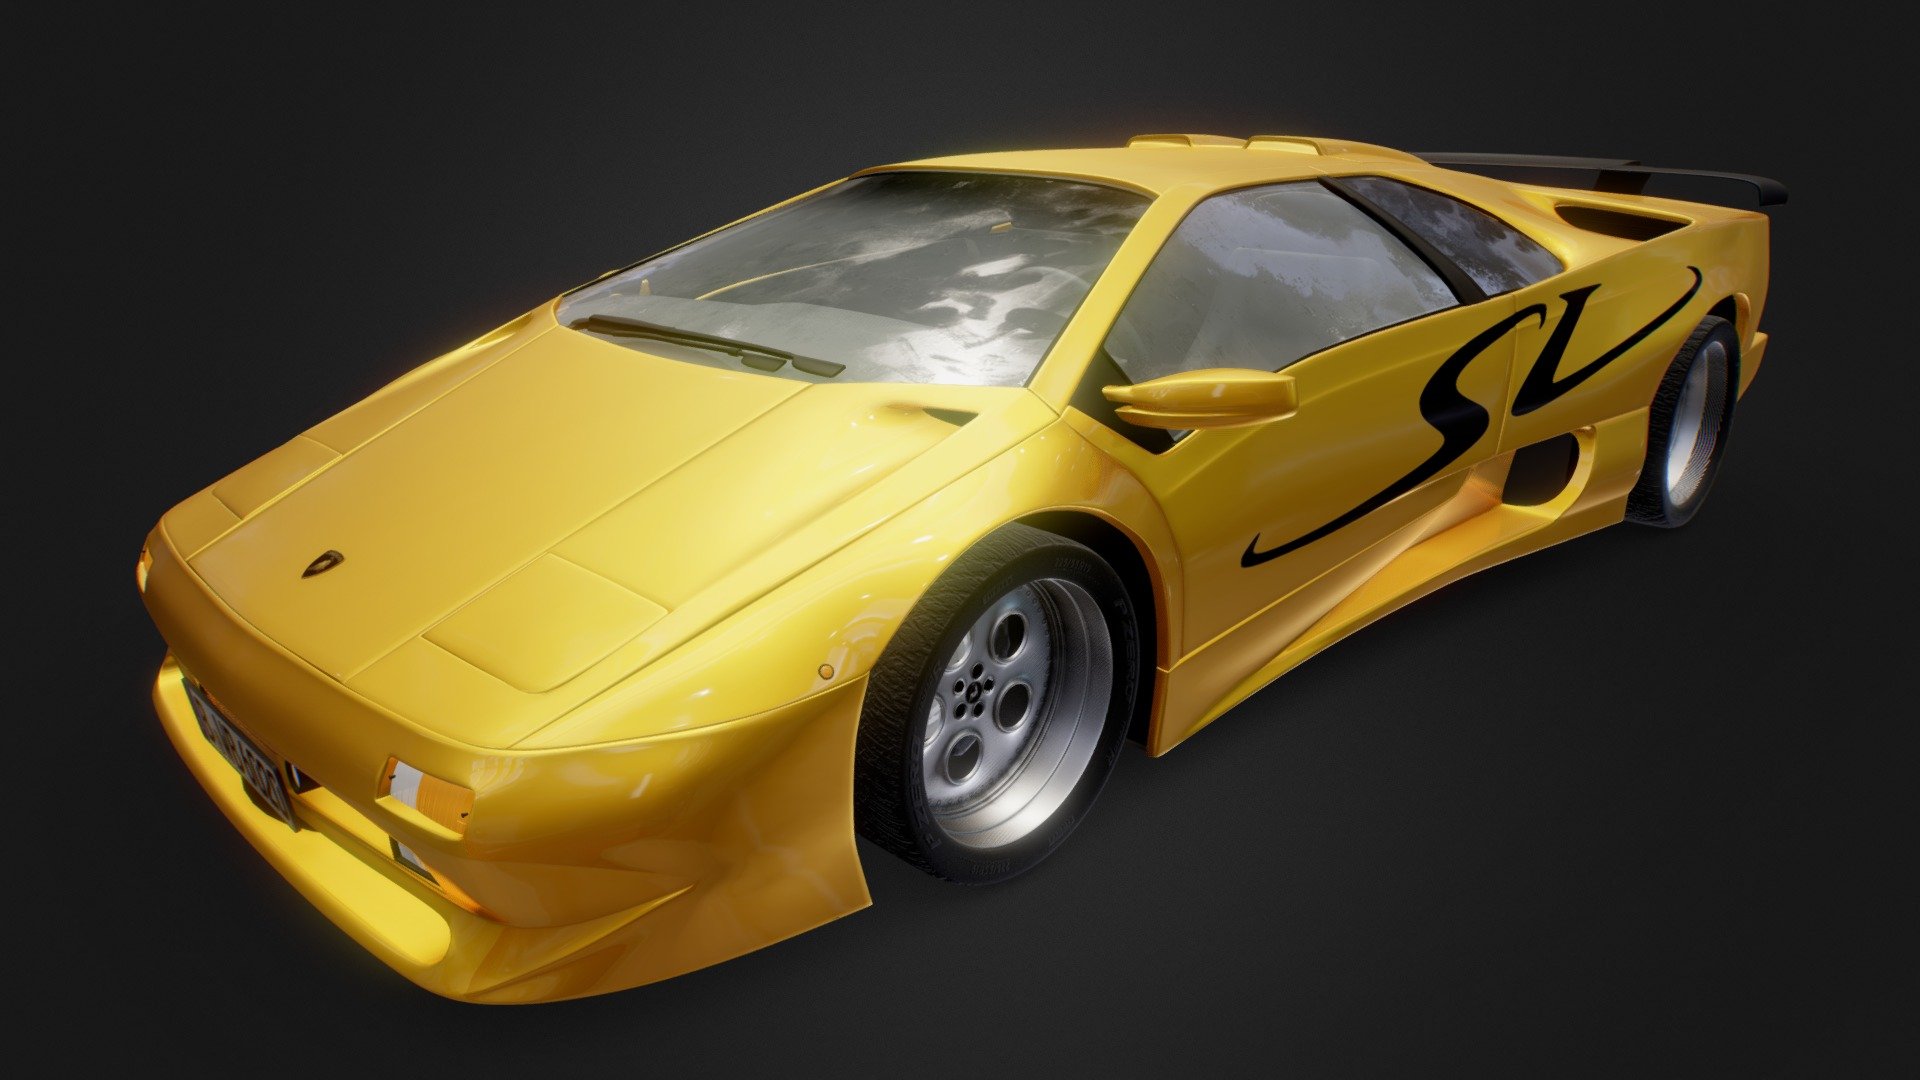 Introduced in 1995, the 𝐋𝐄𝐆𝐄𝐍𝐃𝐀𝐑𝐘 Lamborghini Diablo SV (Super Veloce) builds upon the already amazing Diablo from 1990. Powered by an immensely powerful 5.7L V12 rear mounted engine outputting 510 hp, the SV was priced to be the entry-level Diablo model, although there is nothing &ldquo;entry-level